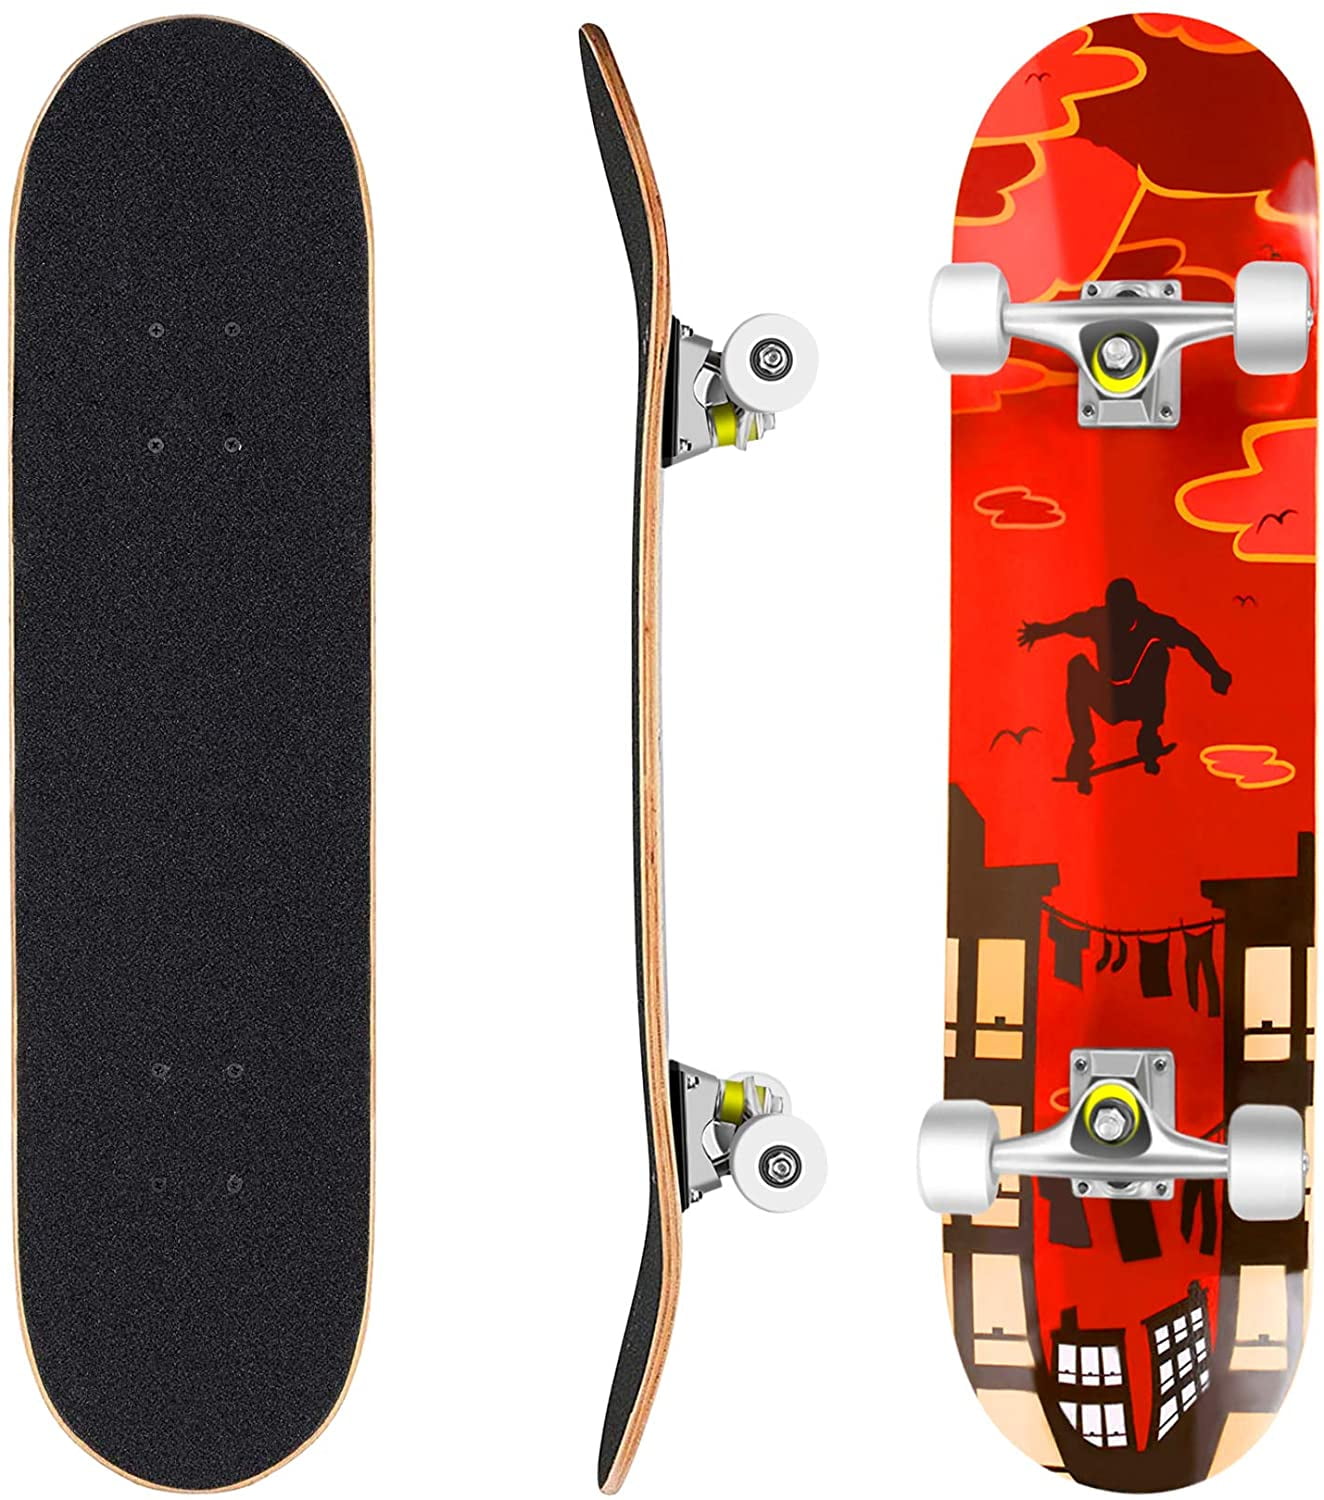 31×8 Complete Skateboard for Teens Adults,9 Layer Canadian Maple Deck Double Kick Concave Trick Skateboards for Kids Ages 6-12 Caroma Kid Skateboard for Beginners Girls Boys 3#People 